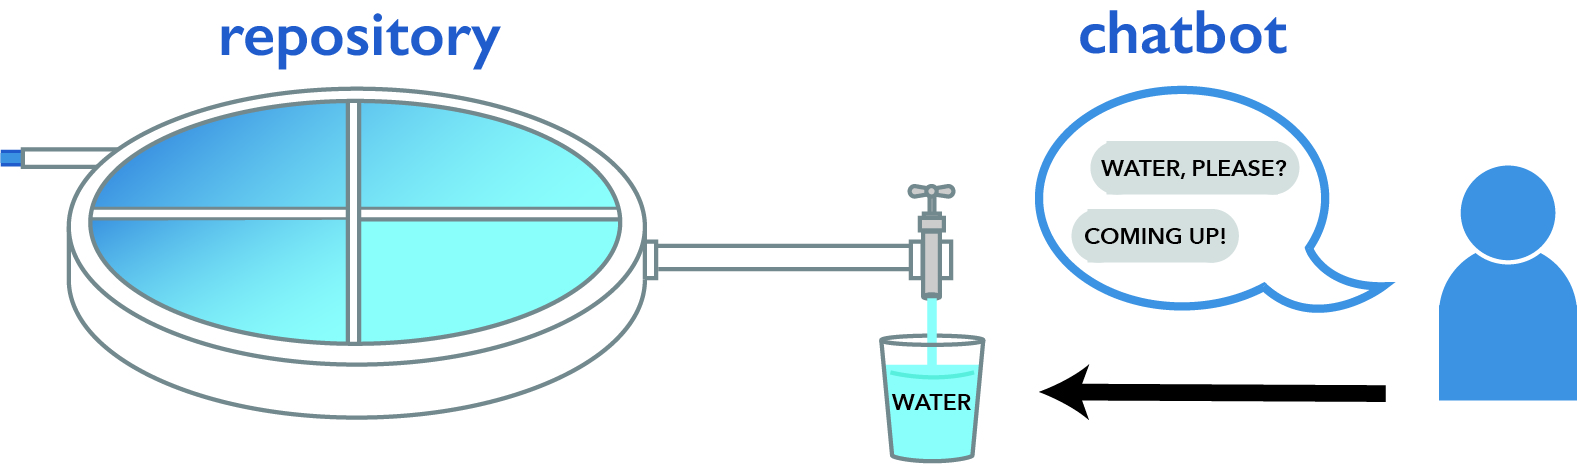 A graphic showing a chatbot requesting a glass be filled with water from a tap. The tap represents the repository.